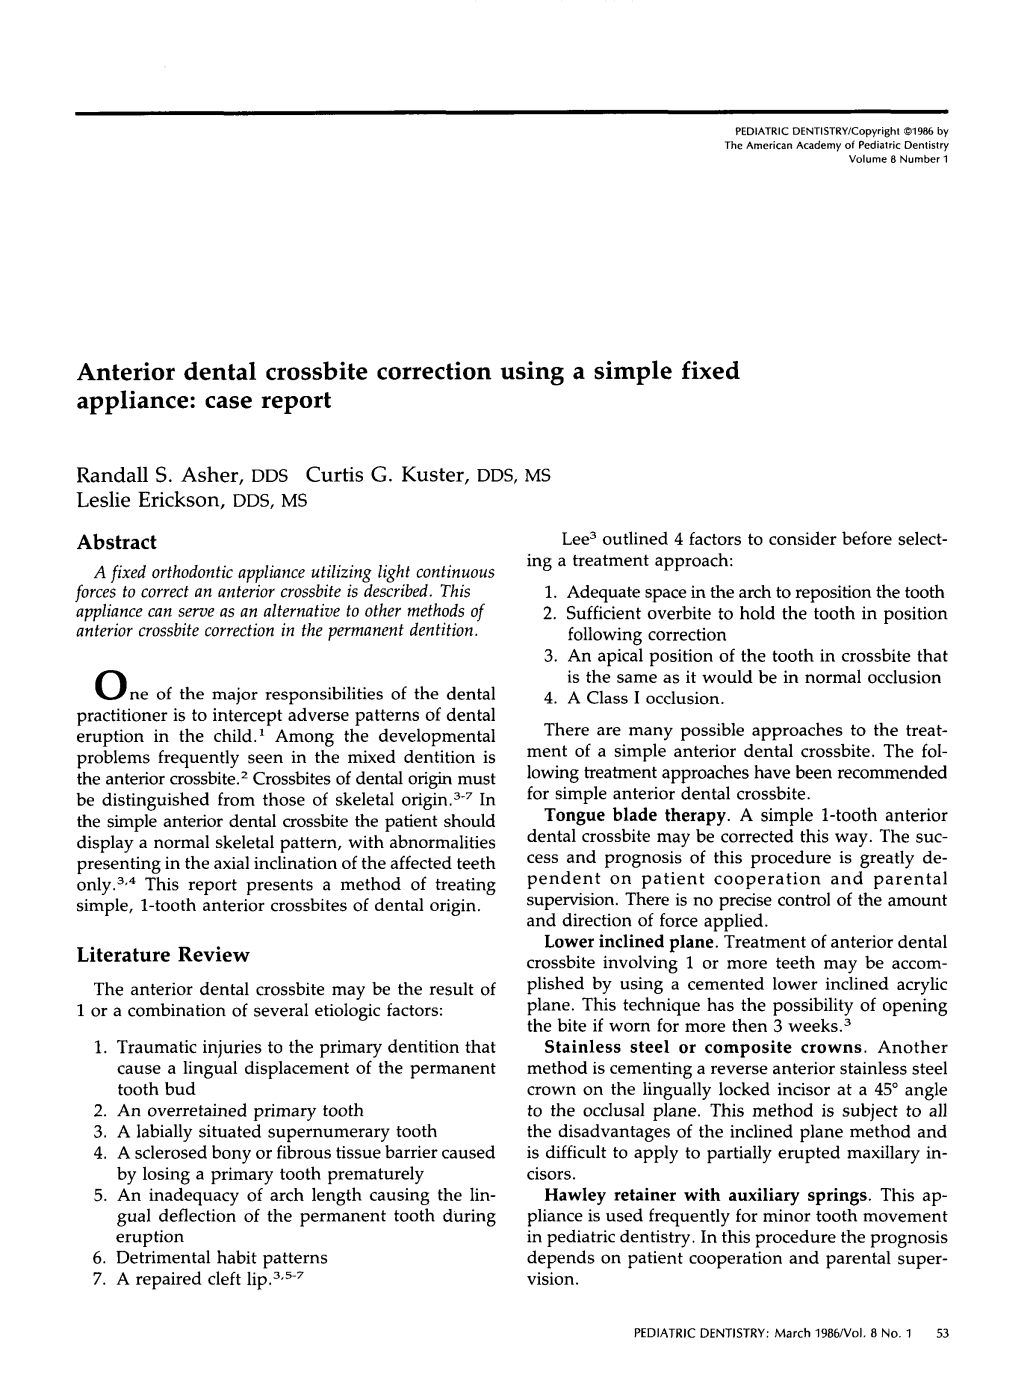 Anterior Dental Crossbite Correction Using a Simple Fixed Appliance: Case Report